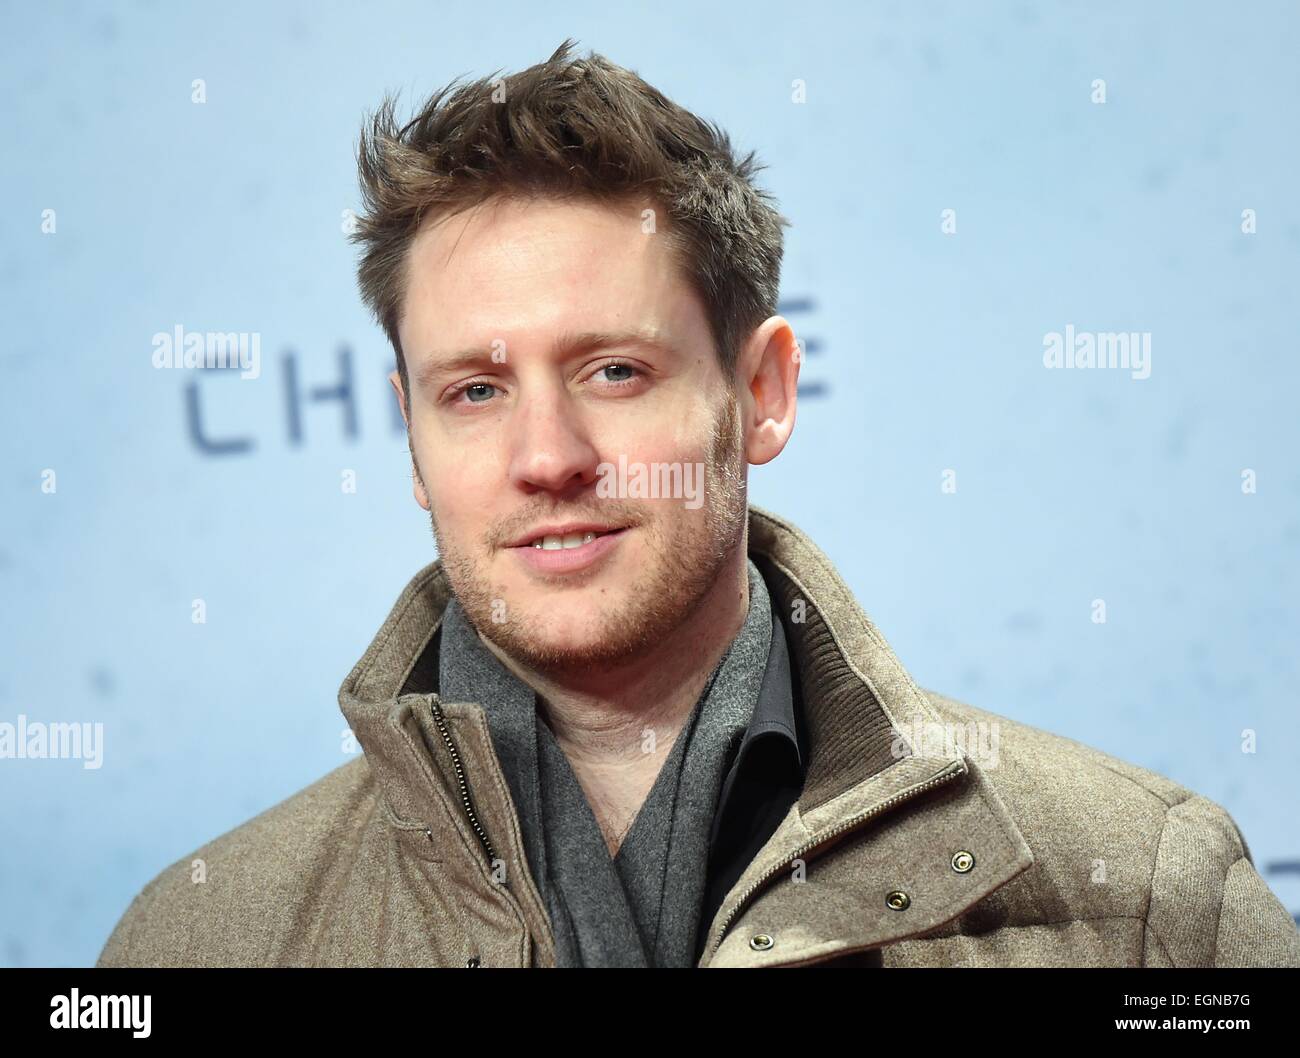 South African director Neill Blomkamp attends the fan event for his new film 'Chappie' in Berlin, Germany, 27 February 2015. The film starts in German cinemas on 5 March 2015. Photo:  Britta Pedersen/dpa Stock Photo